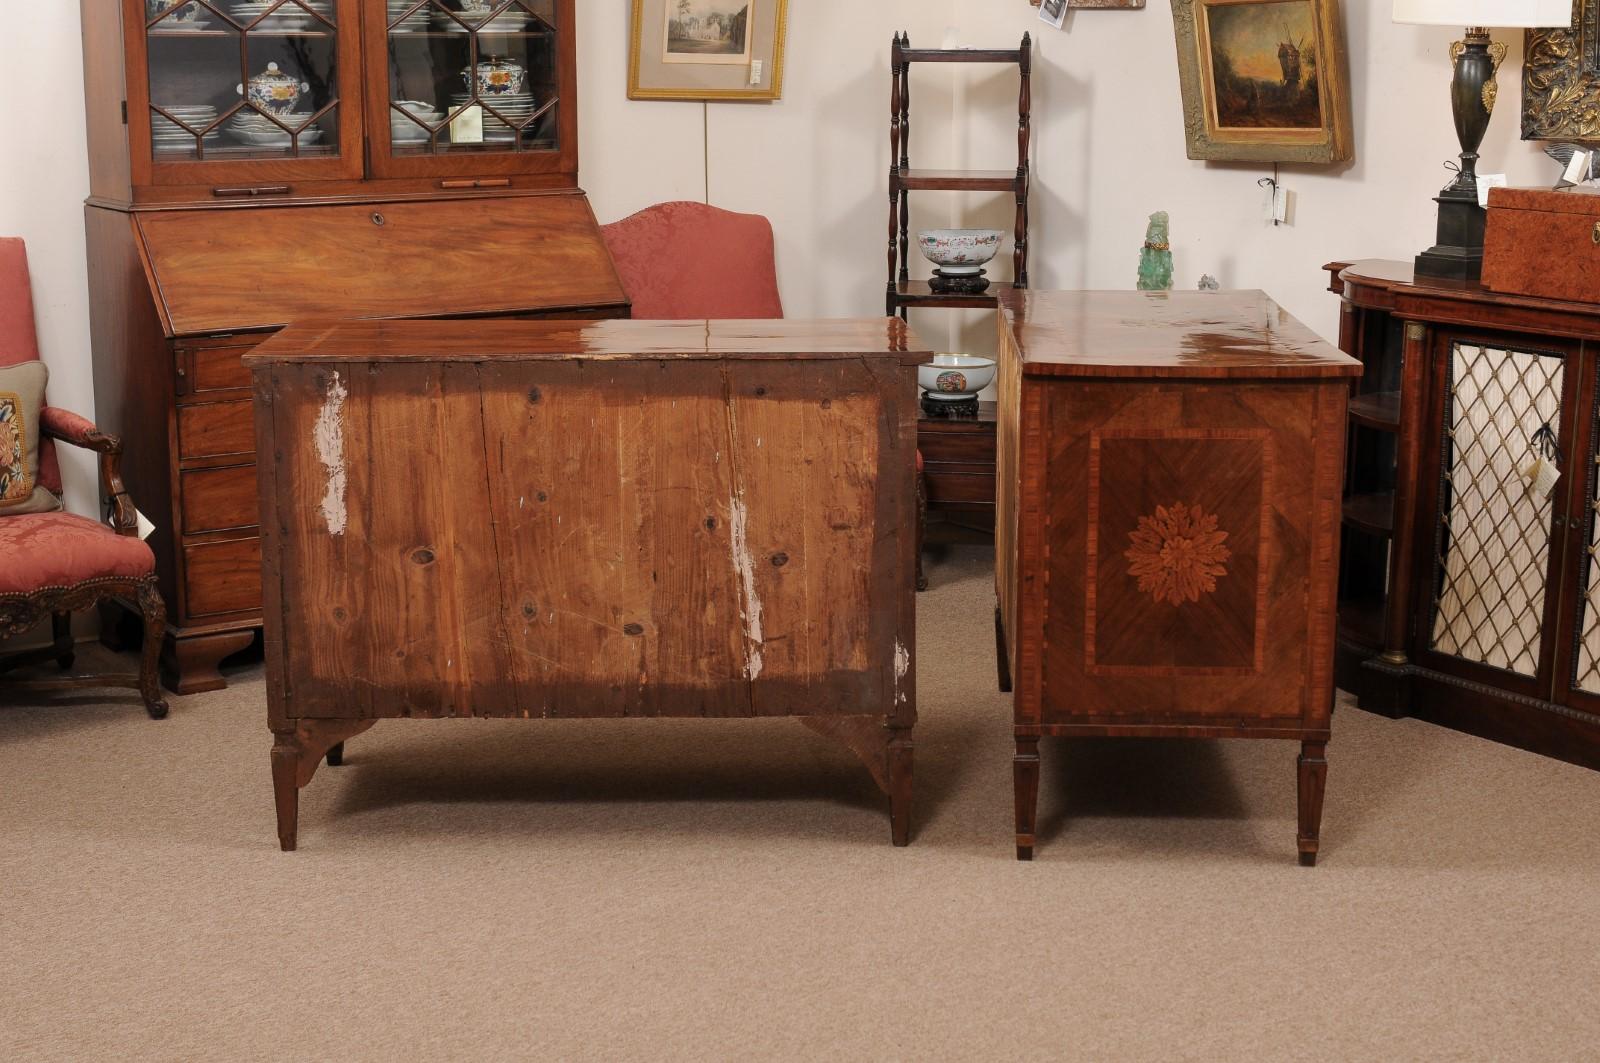 Pair of Italian Neoclassical Walnut Commodes with Foliage Design, 19th Century For Sale 8